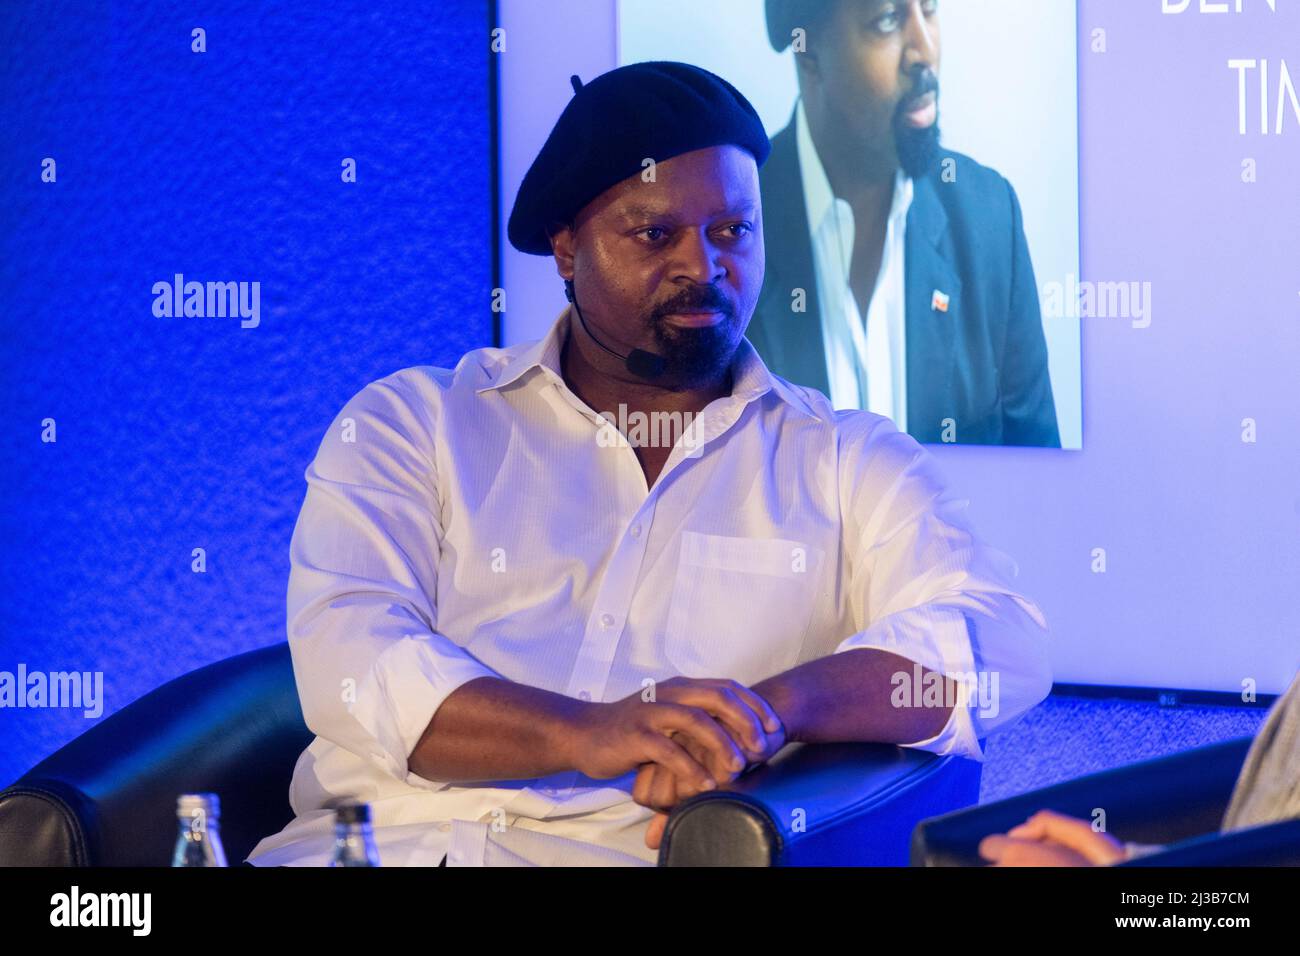 05 April 2022. London, UK. Author writer Ben Okri takes part in a talk at The London Book Fair held at Olympia venue. Photo by Ray Tang. Stock Photo